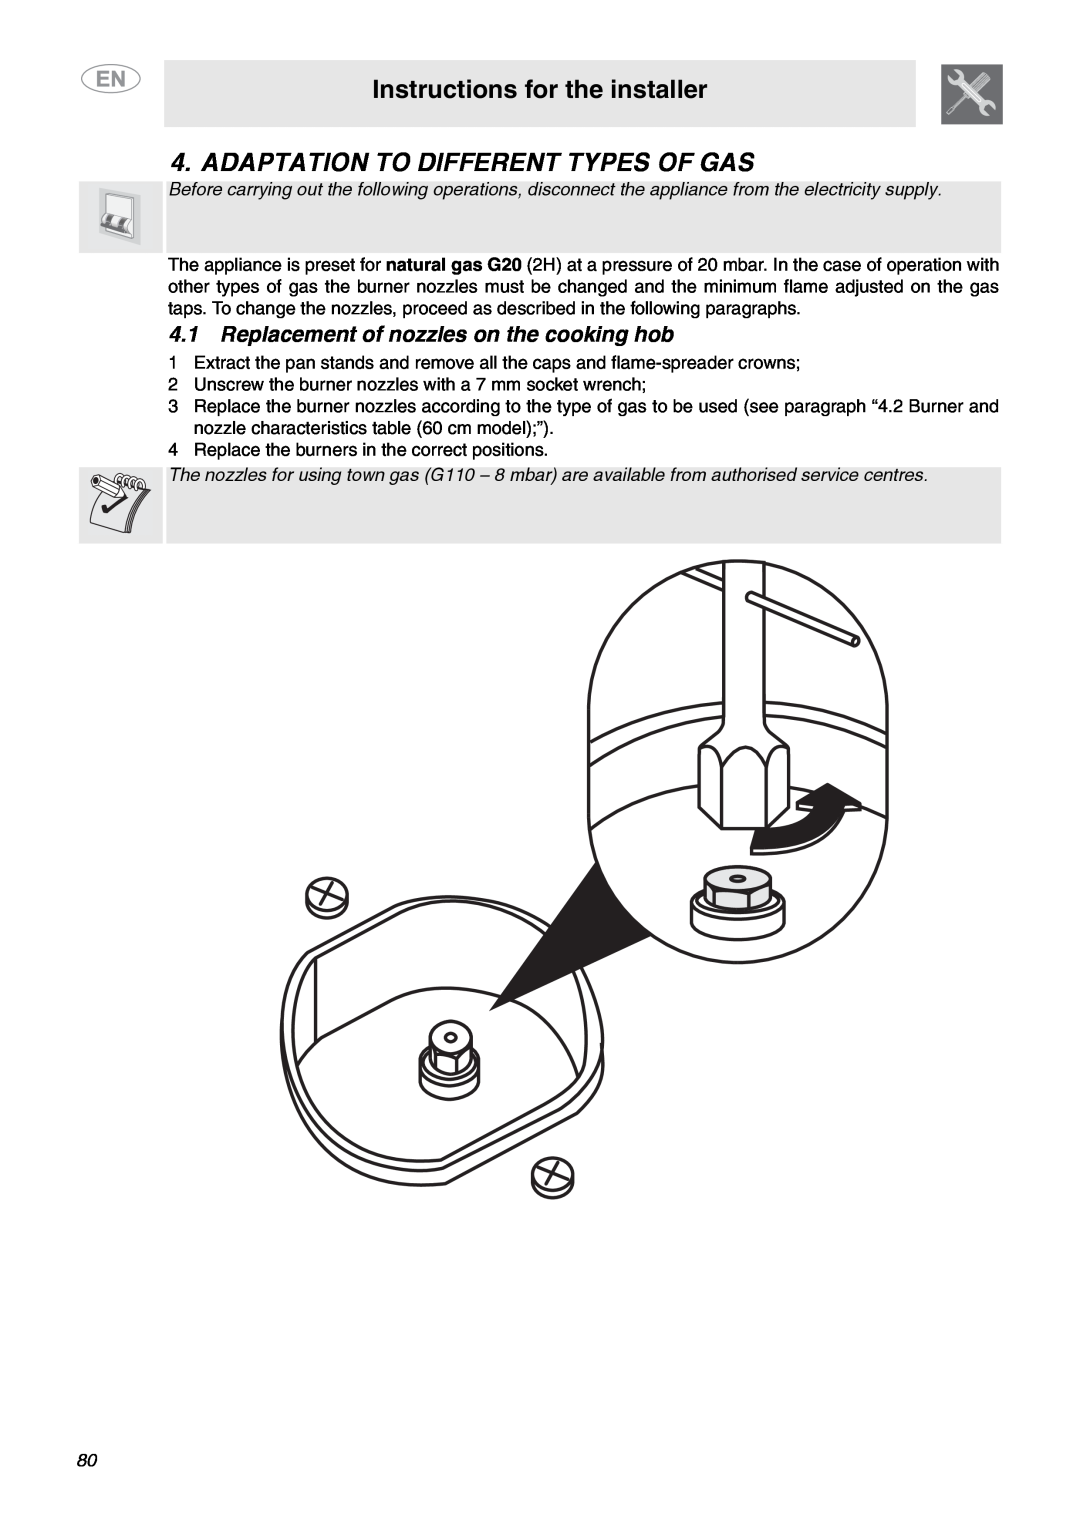 Smeg C6GVXI manual Adaptation To Different Types Of Gas, Replacement of nozzles on the cooking hob 